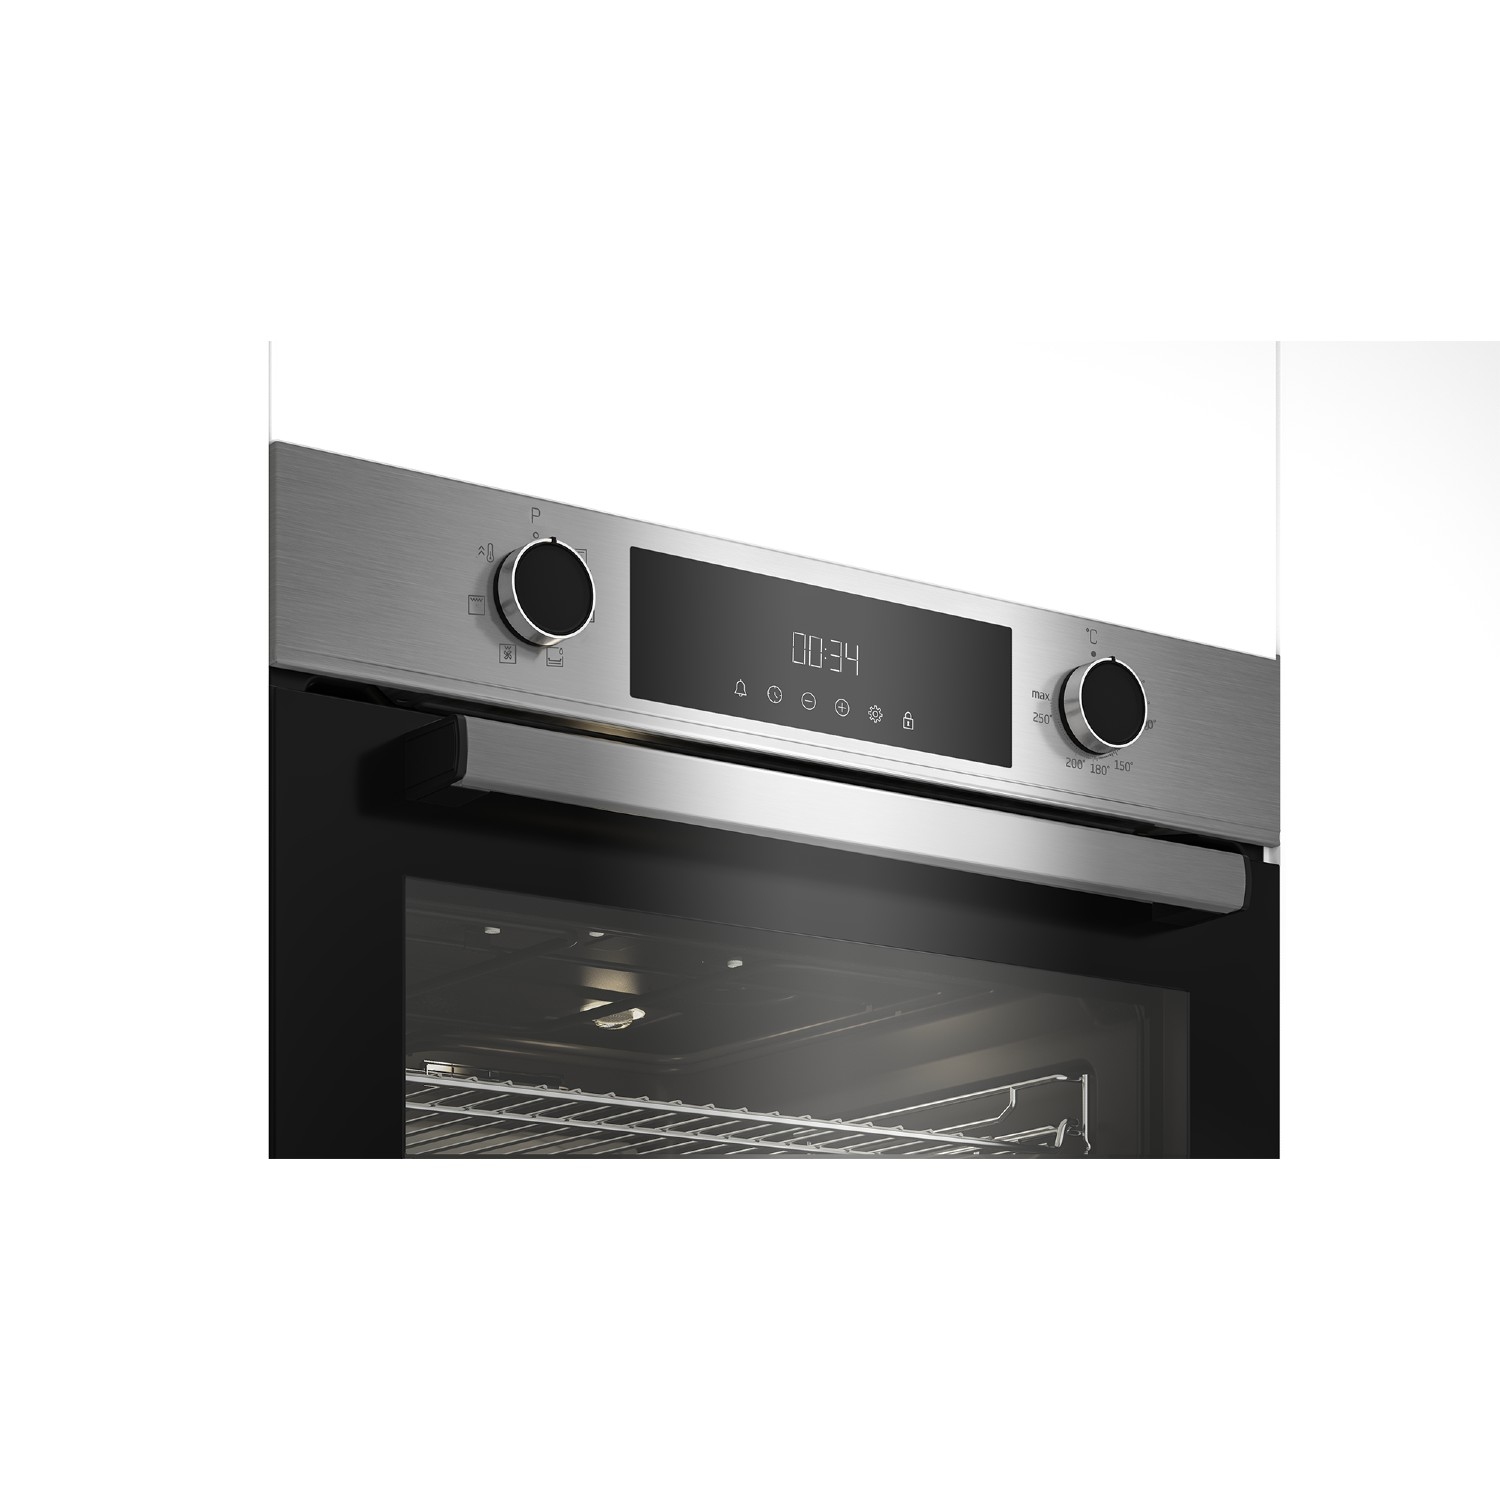 Beko AeroPerfect CIMY91X 60cm Built In Single Multi - function Oven - Stainless Steel - 1